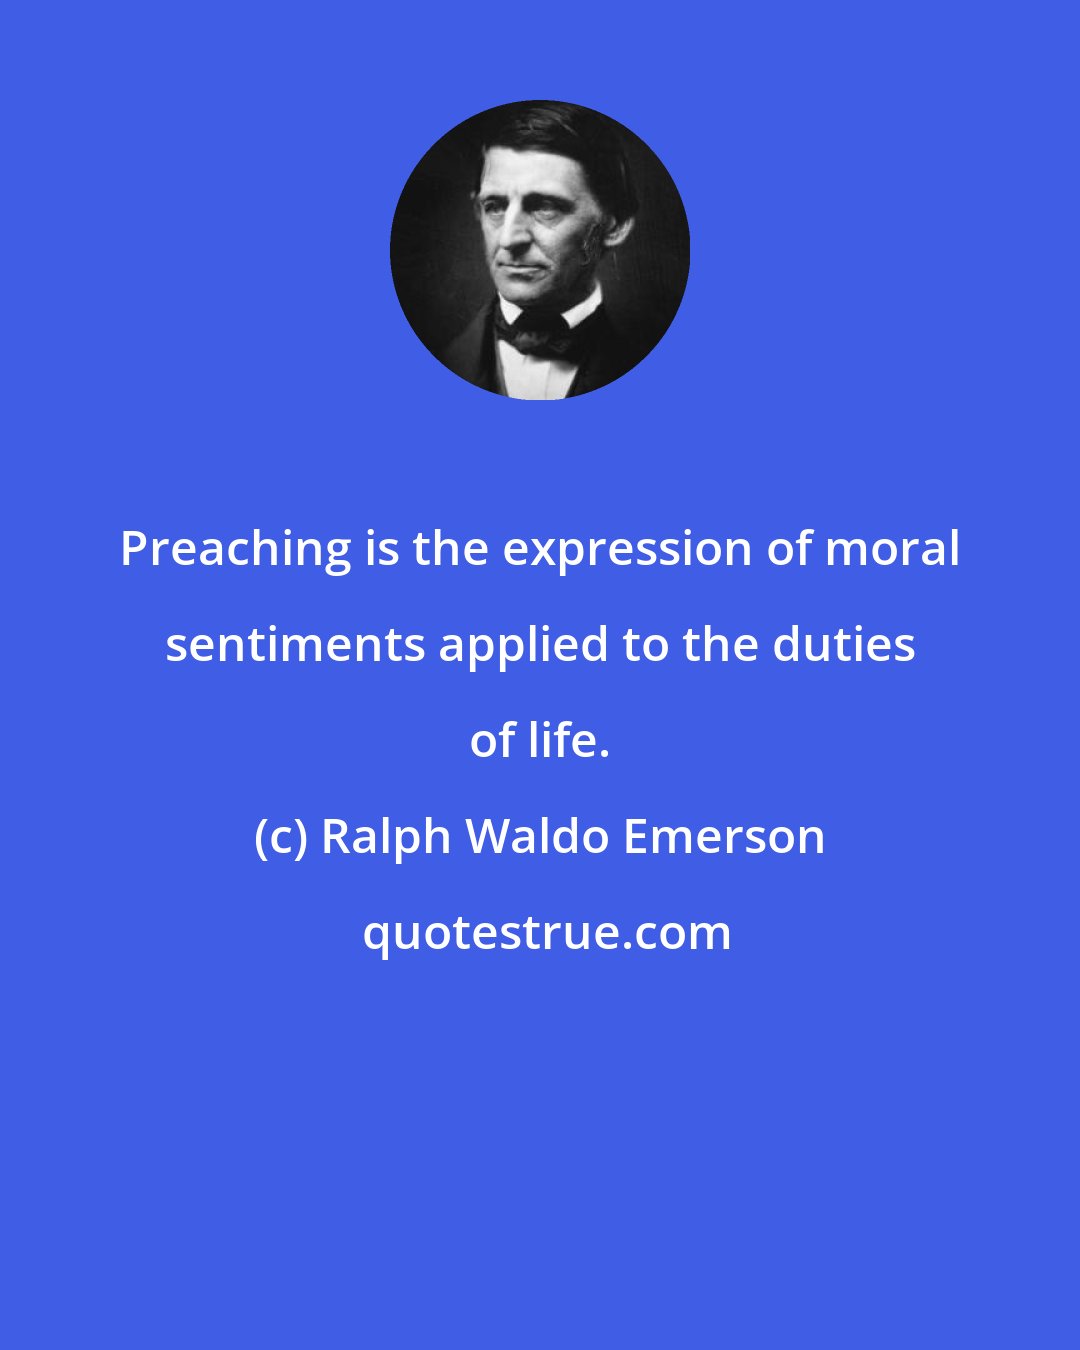 Ralph Waldo Emerson: Preaching is the expression of moral sentiments applied to the duties of life.